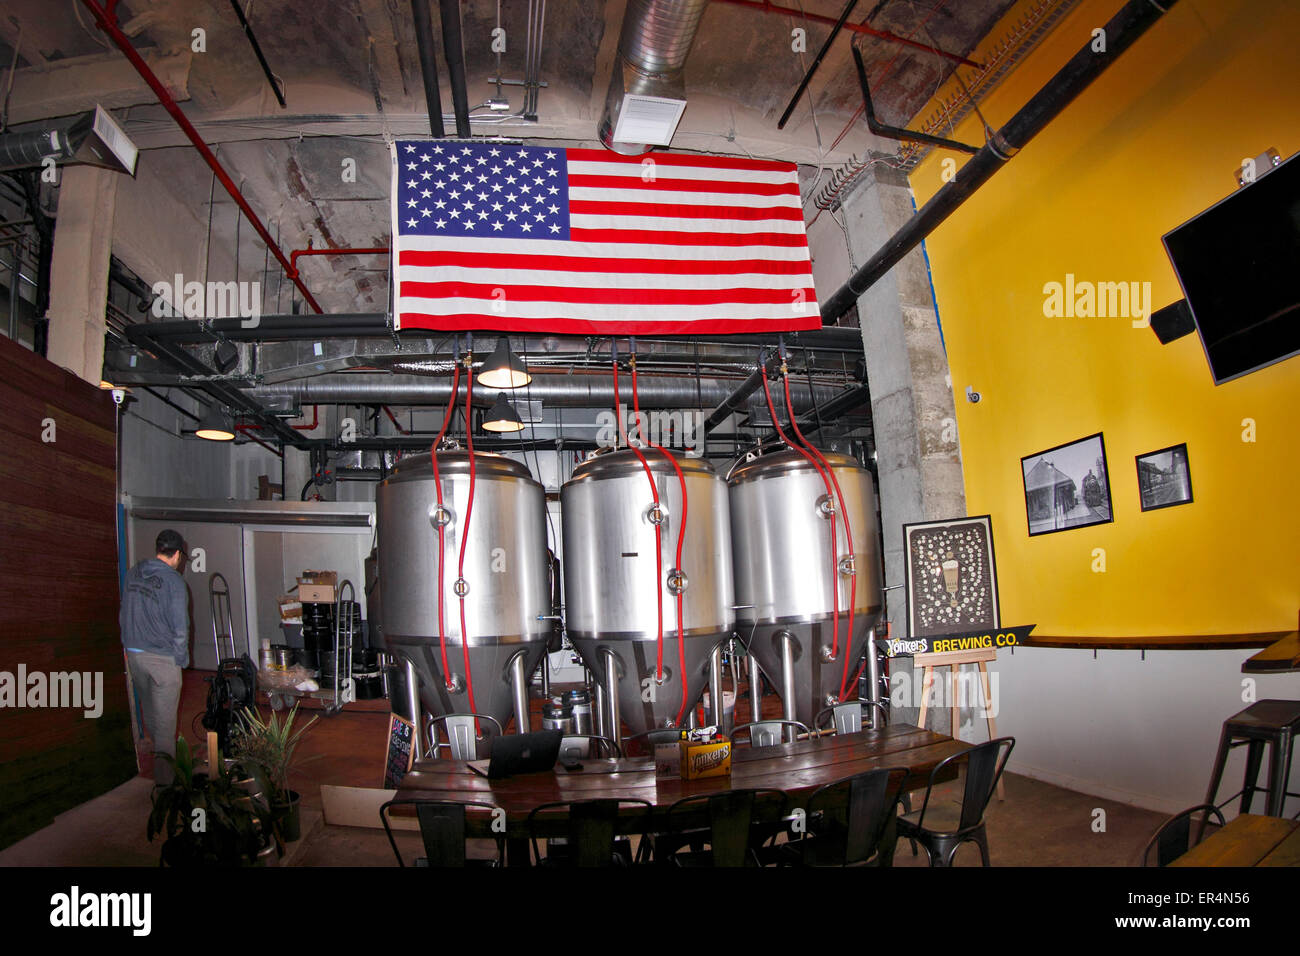 Inside the Yonkers Brewing Company bar and restaurant Yonkers New York Stock Photo